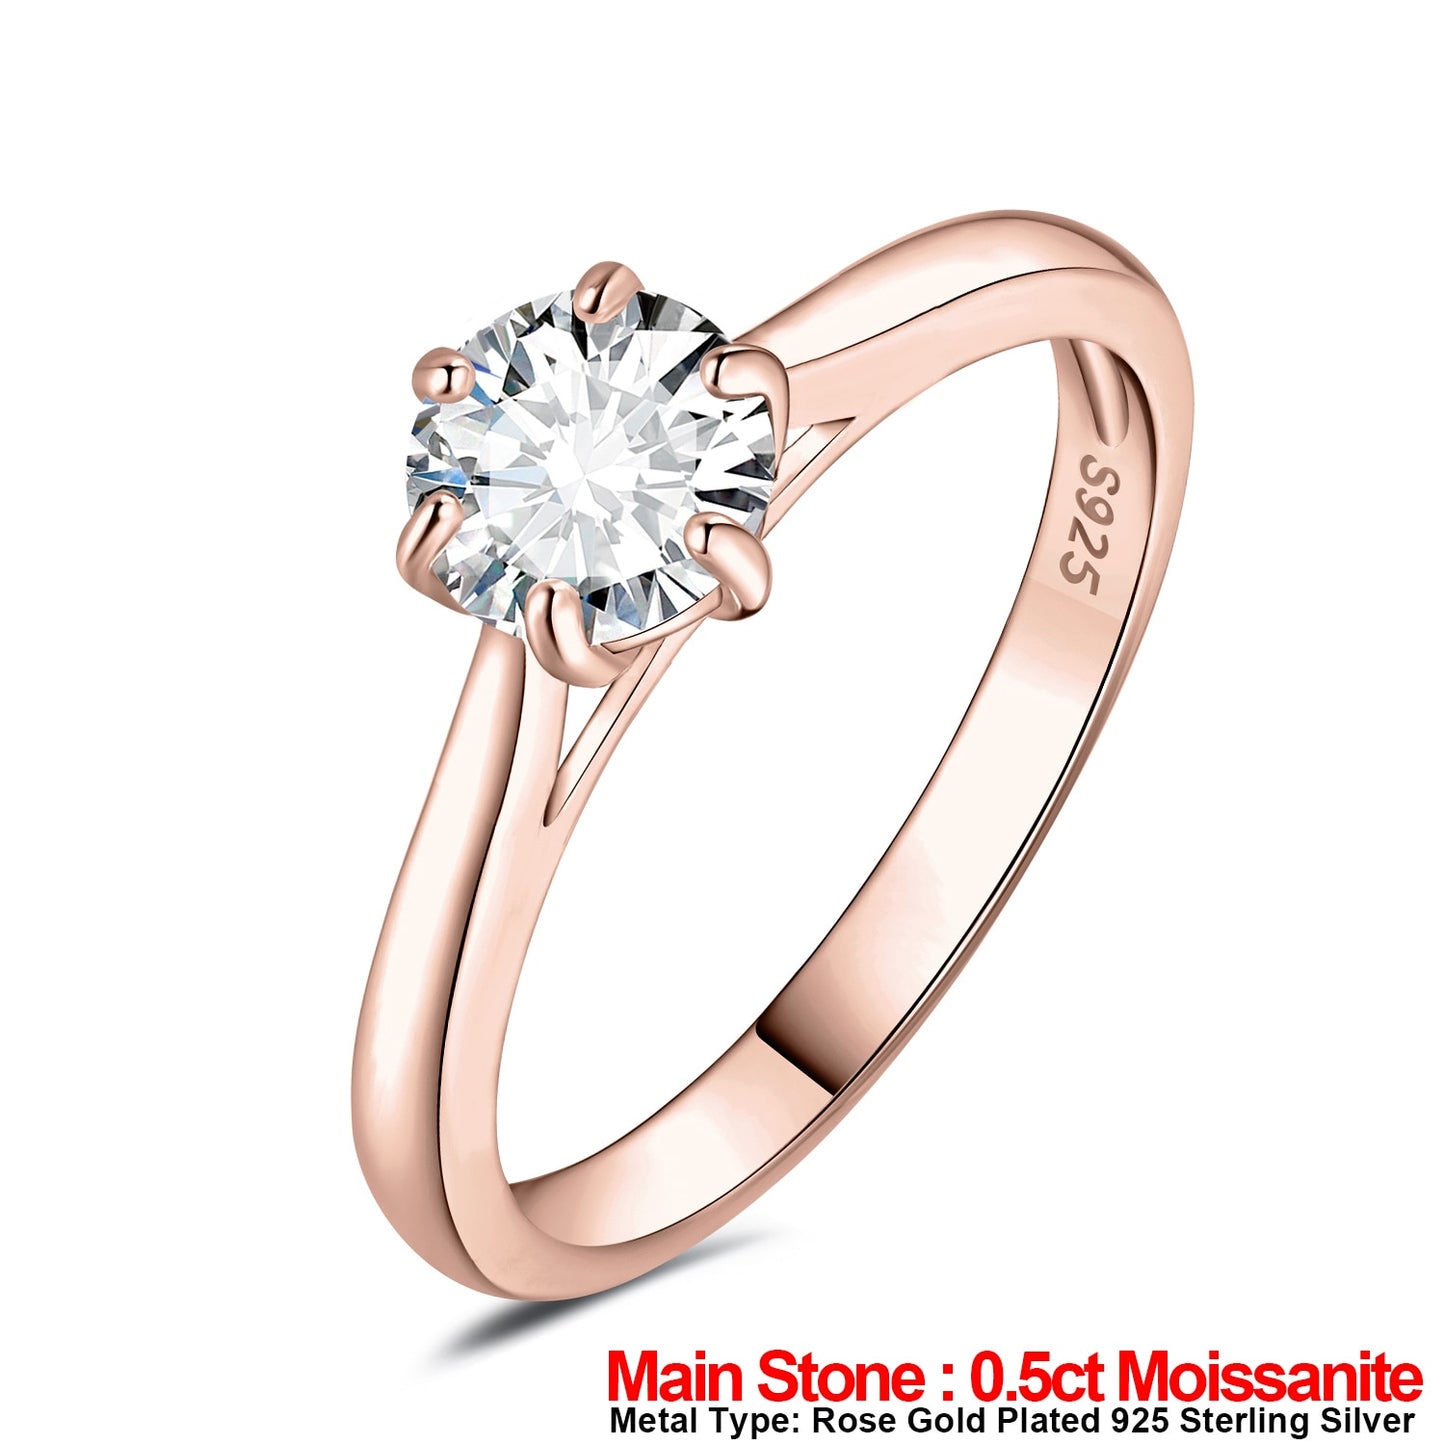 JewelryPalace Moissanite D Color 0.5ct 1ct 1.5ct 2ct Round Cut S925 Sterling Silver Solitaire Wedding Engagement Ring for Women China Rose Gold Plated|GRA Certificate